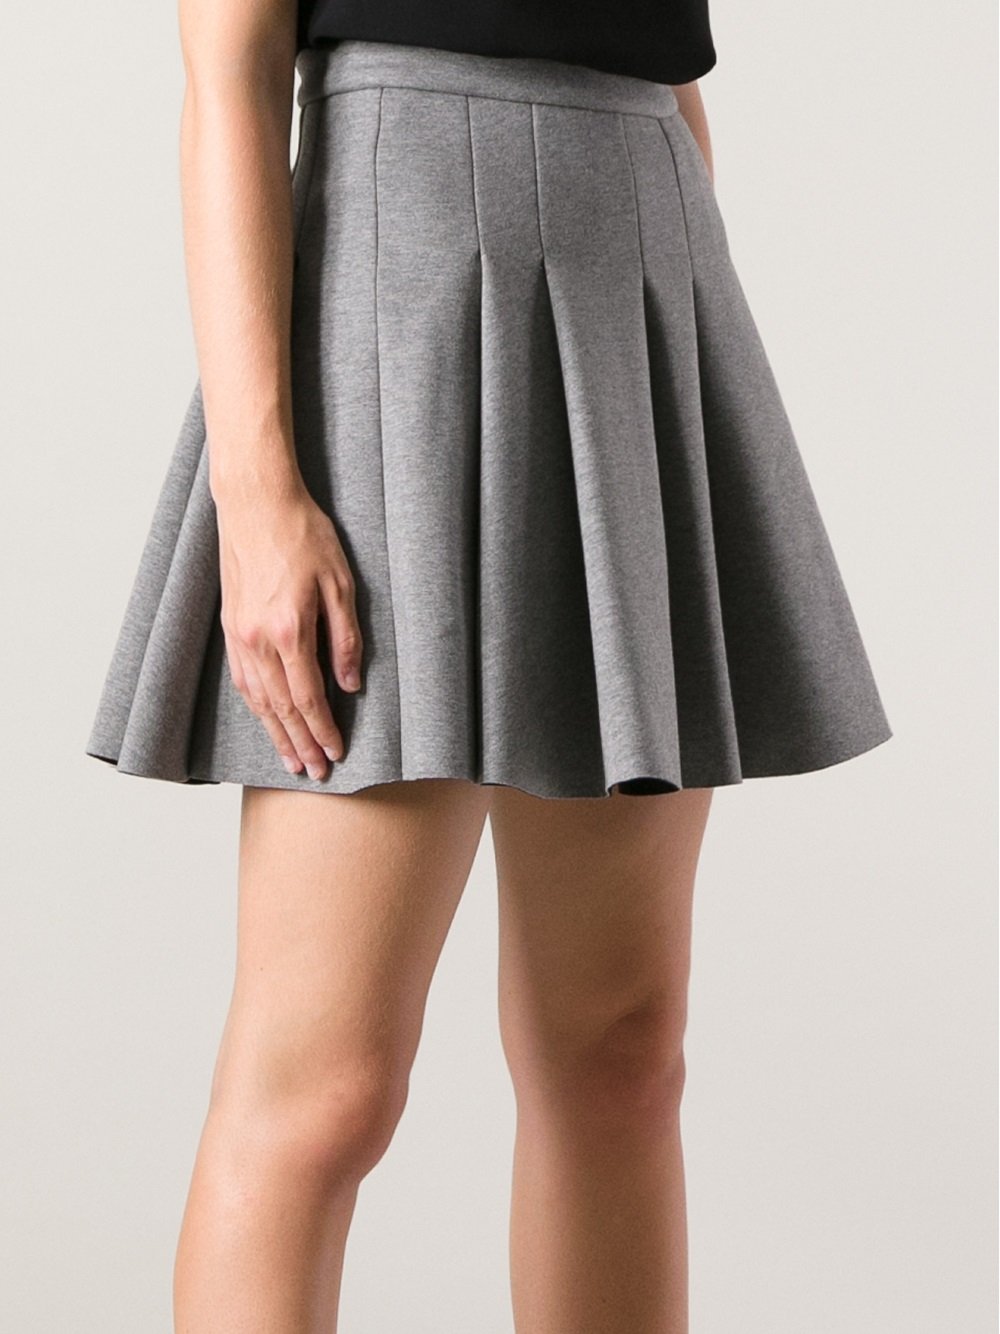 T By Alexander Wang Pleated Skirt in Grey (Gray) - Lyst